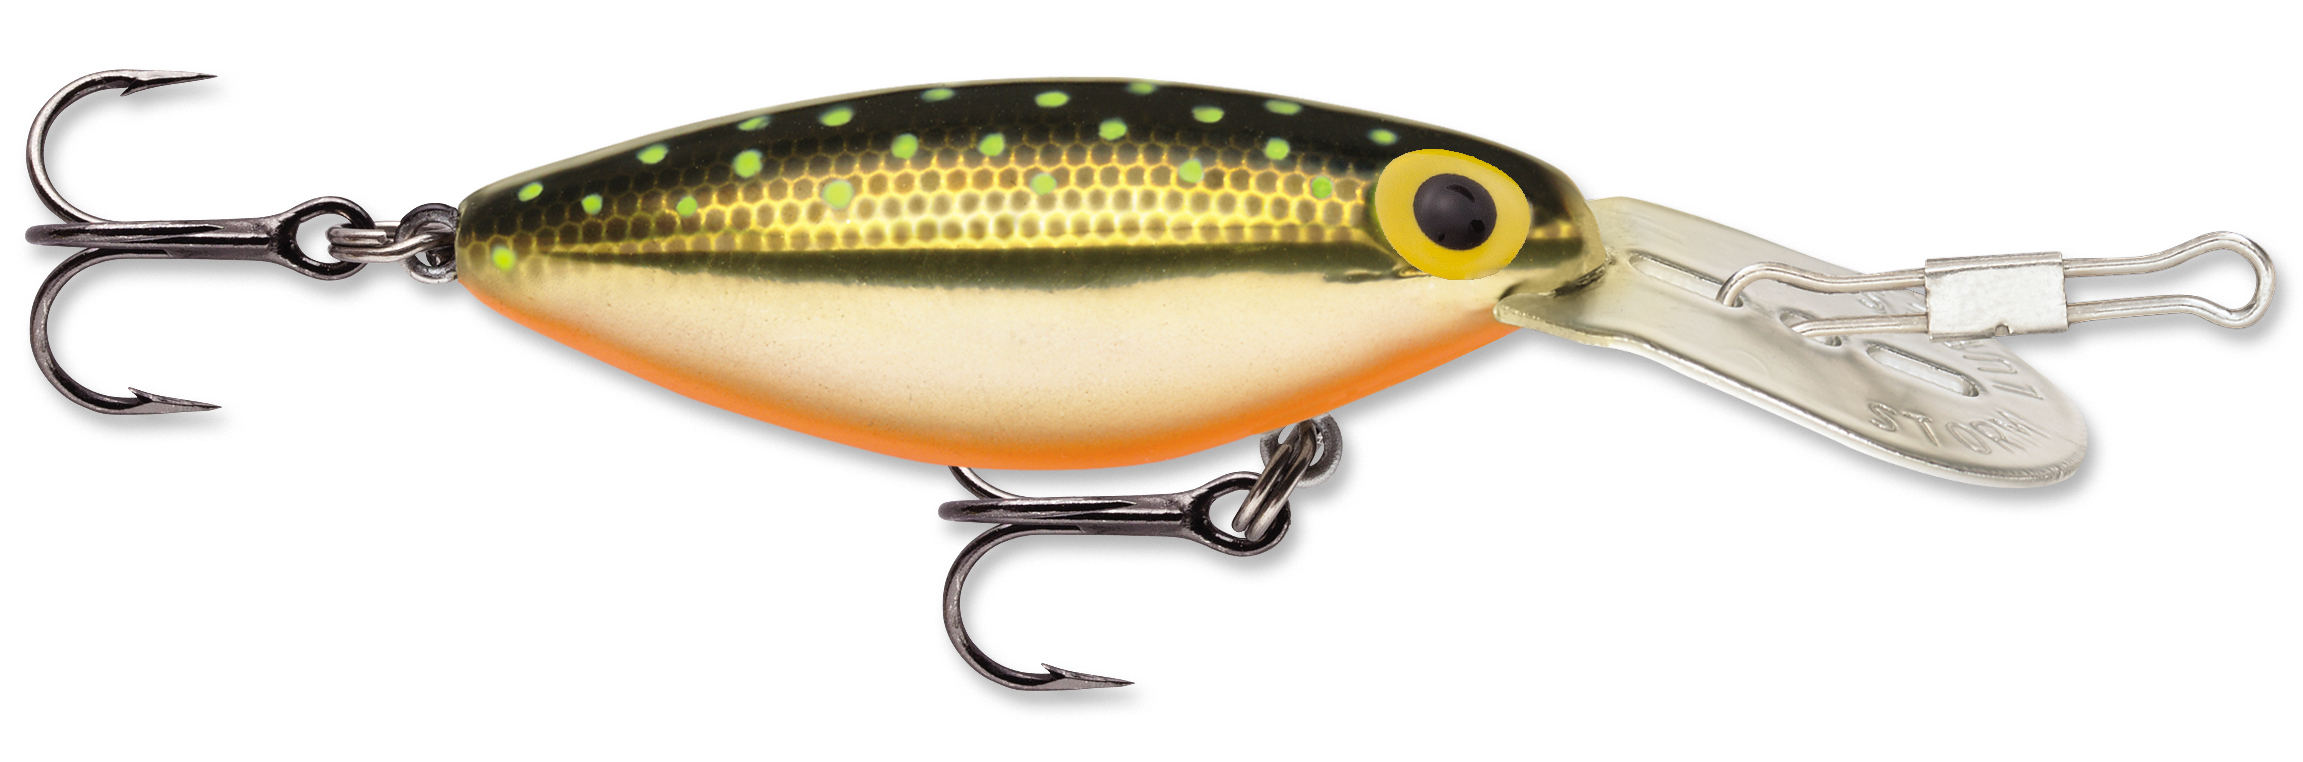 https://www.precisionfishing.com/img/products/023/023%2007856%20Storm%20Original%20Hot%20n%20Tot%2005%20-%20Metallic%20Gold%20with%20Chartreuse%20Specks.jpg